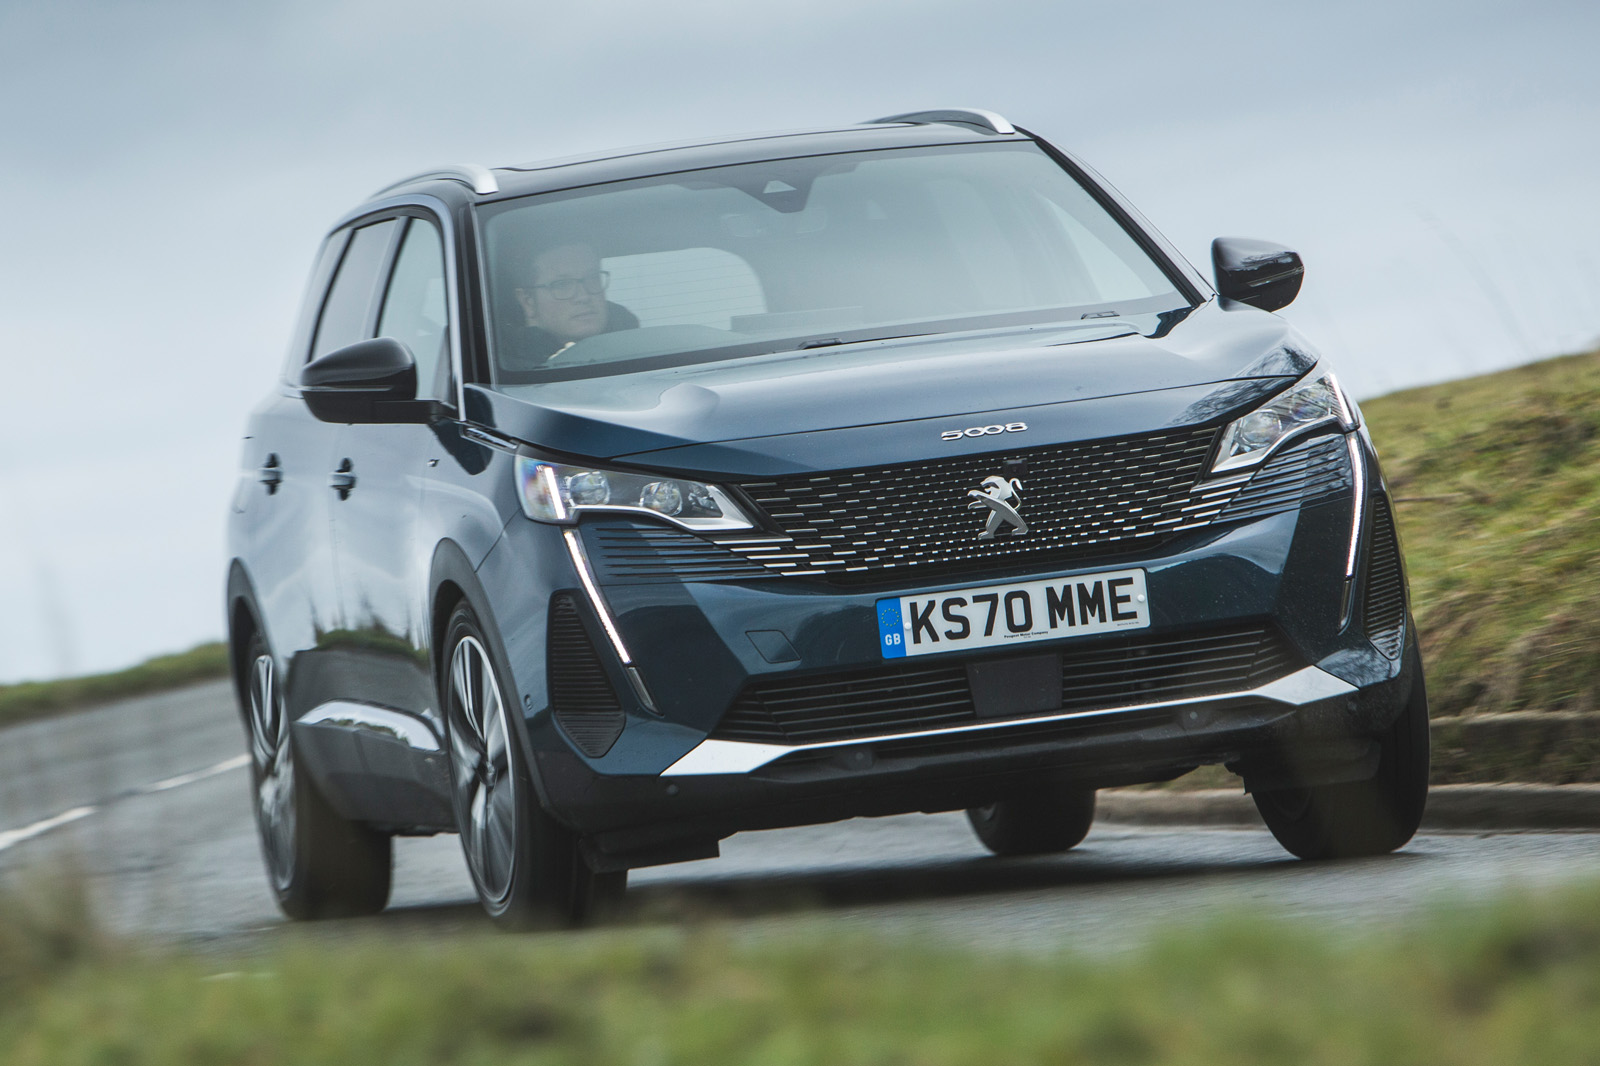 Nearly new buying guide: Peugeot 5008